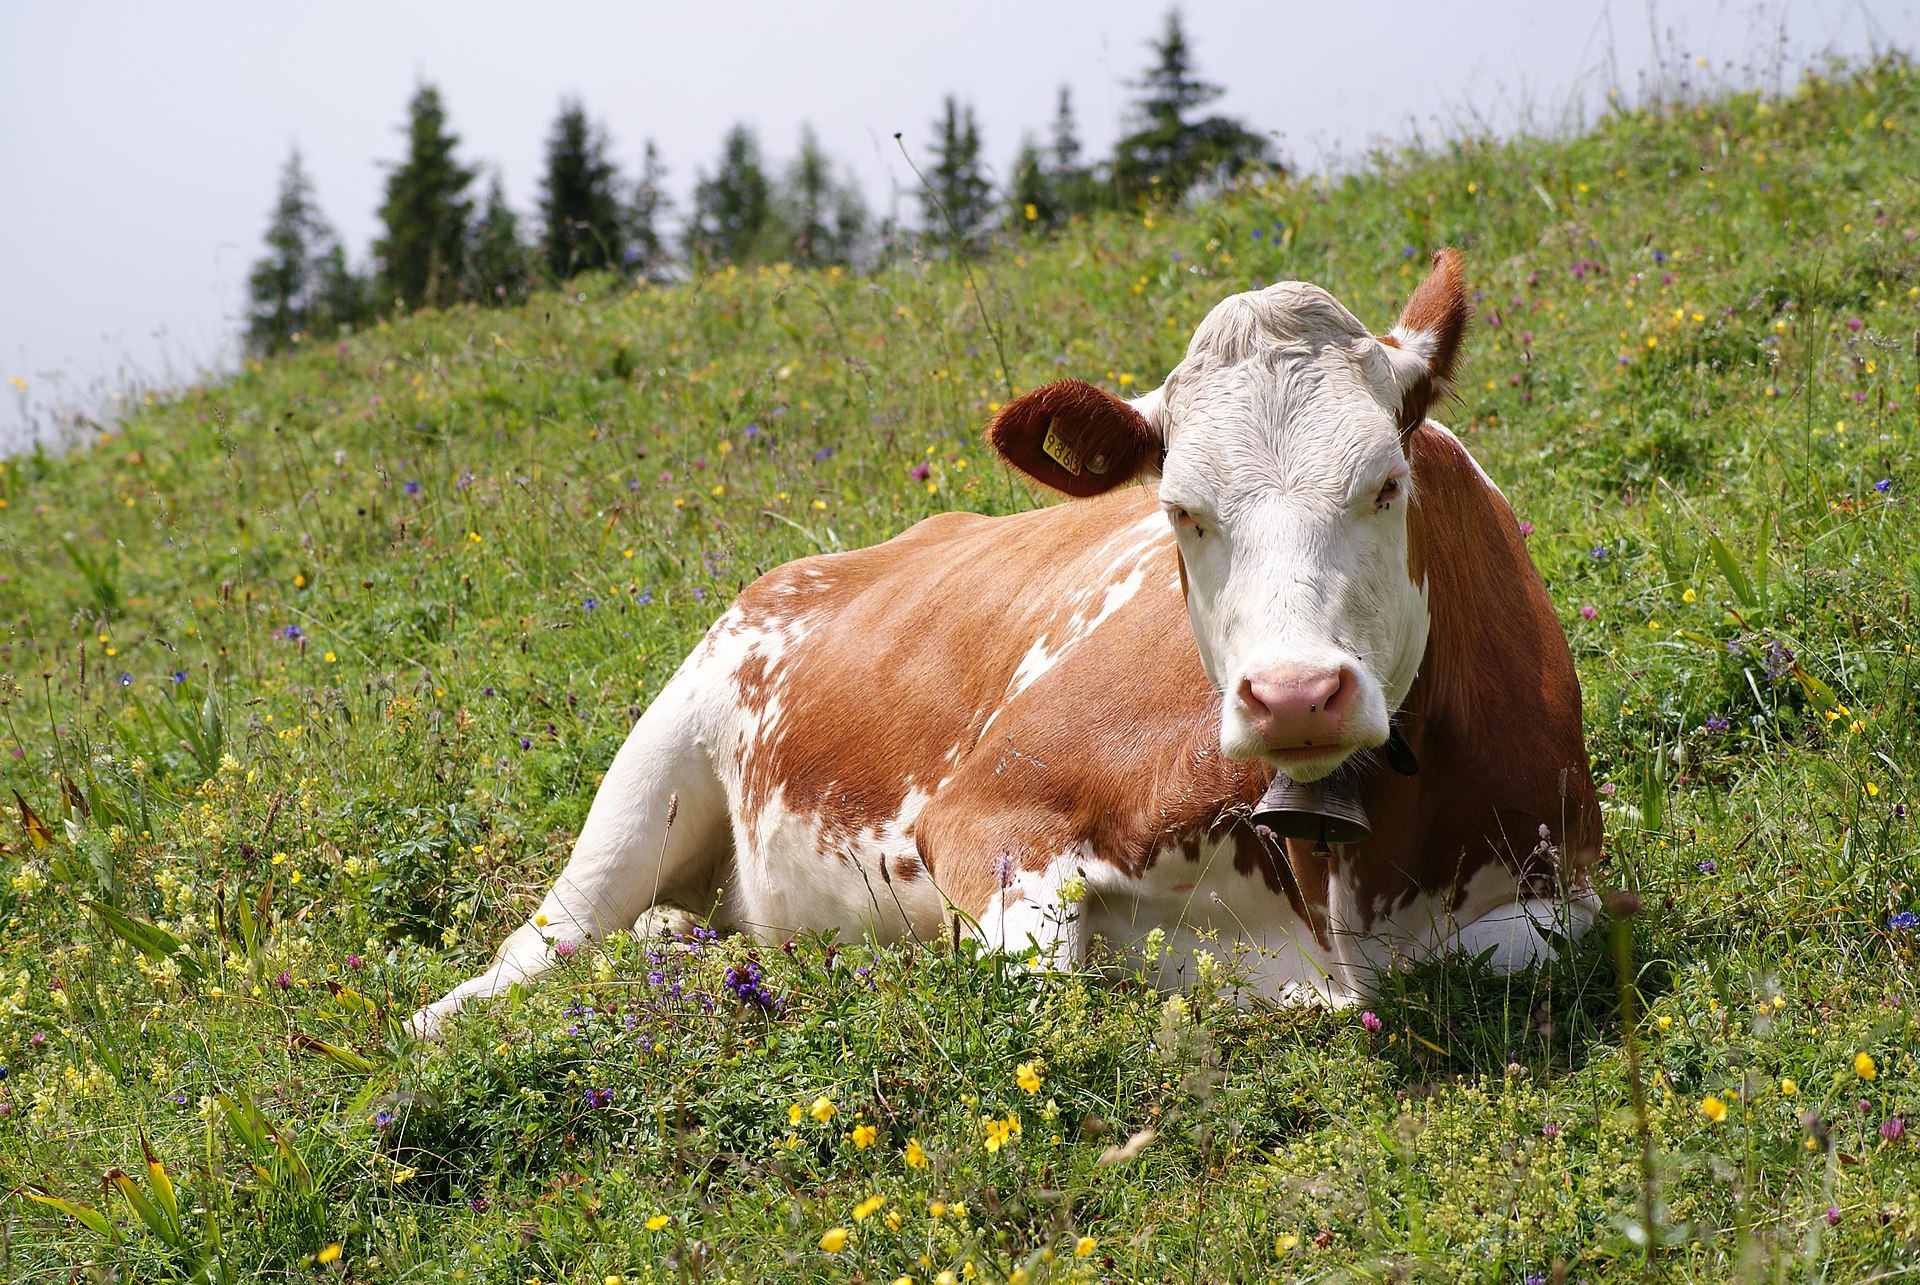 a cow sitting in a grassy field